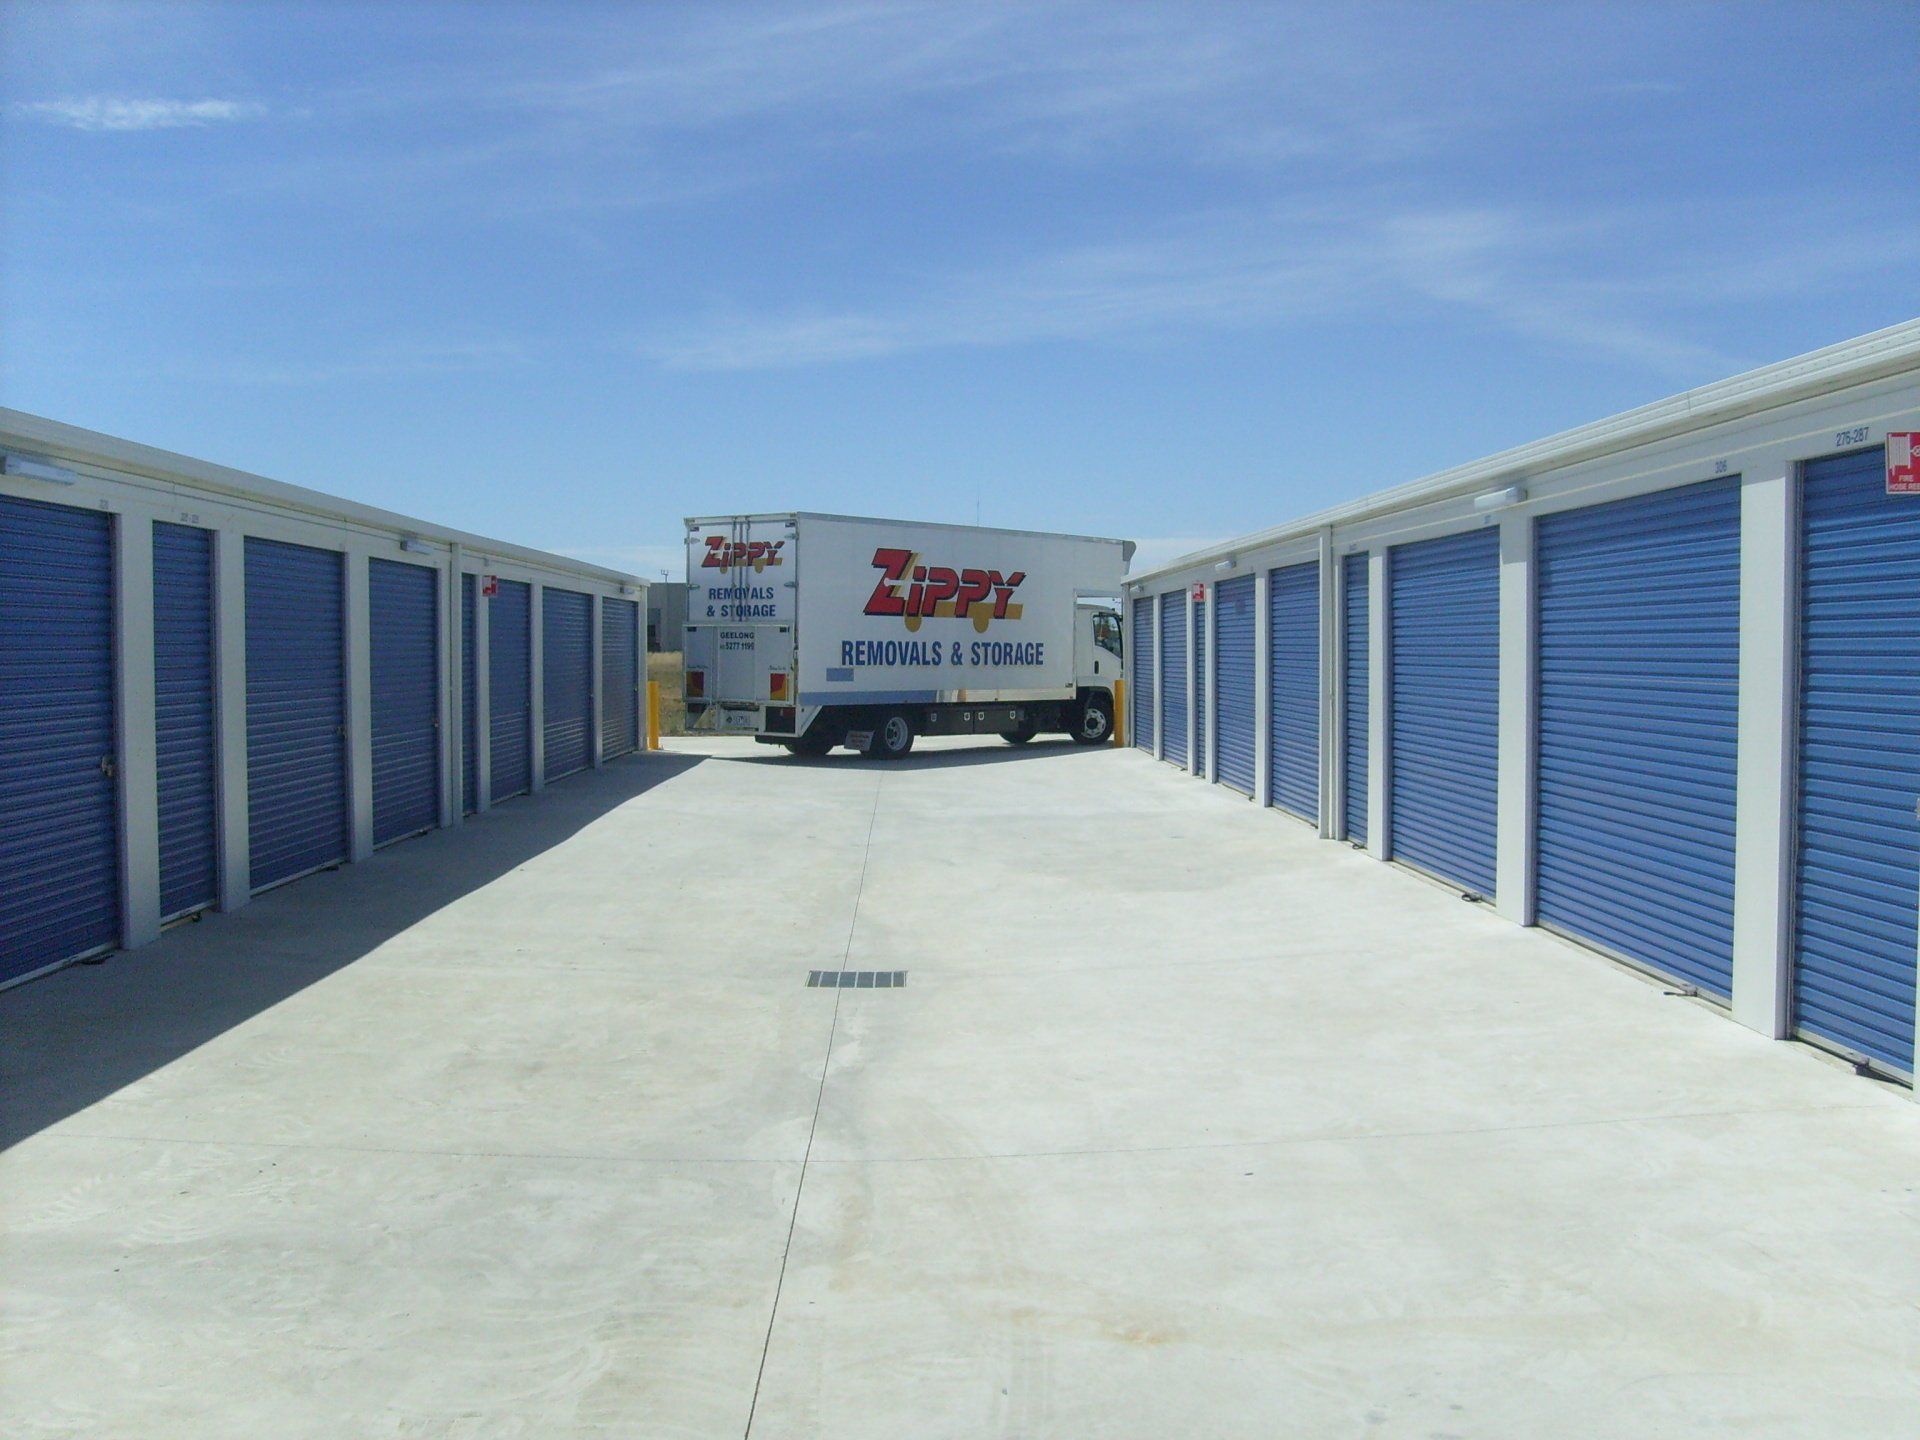 Zippy Moving Truck — Geelong, VIC — Zippy Removals & Storage